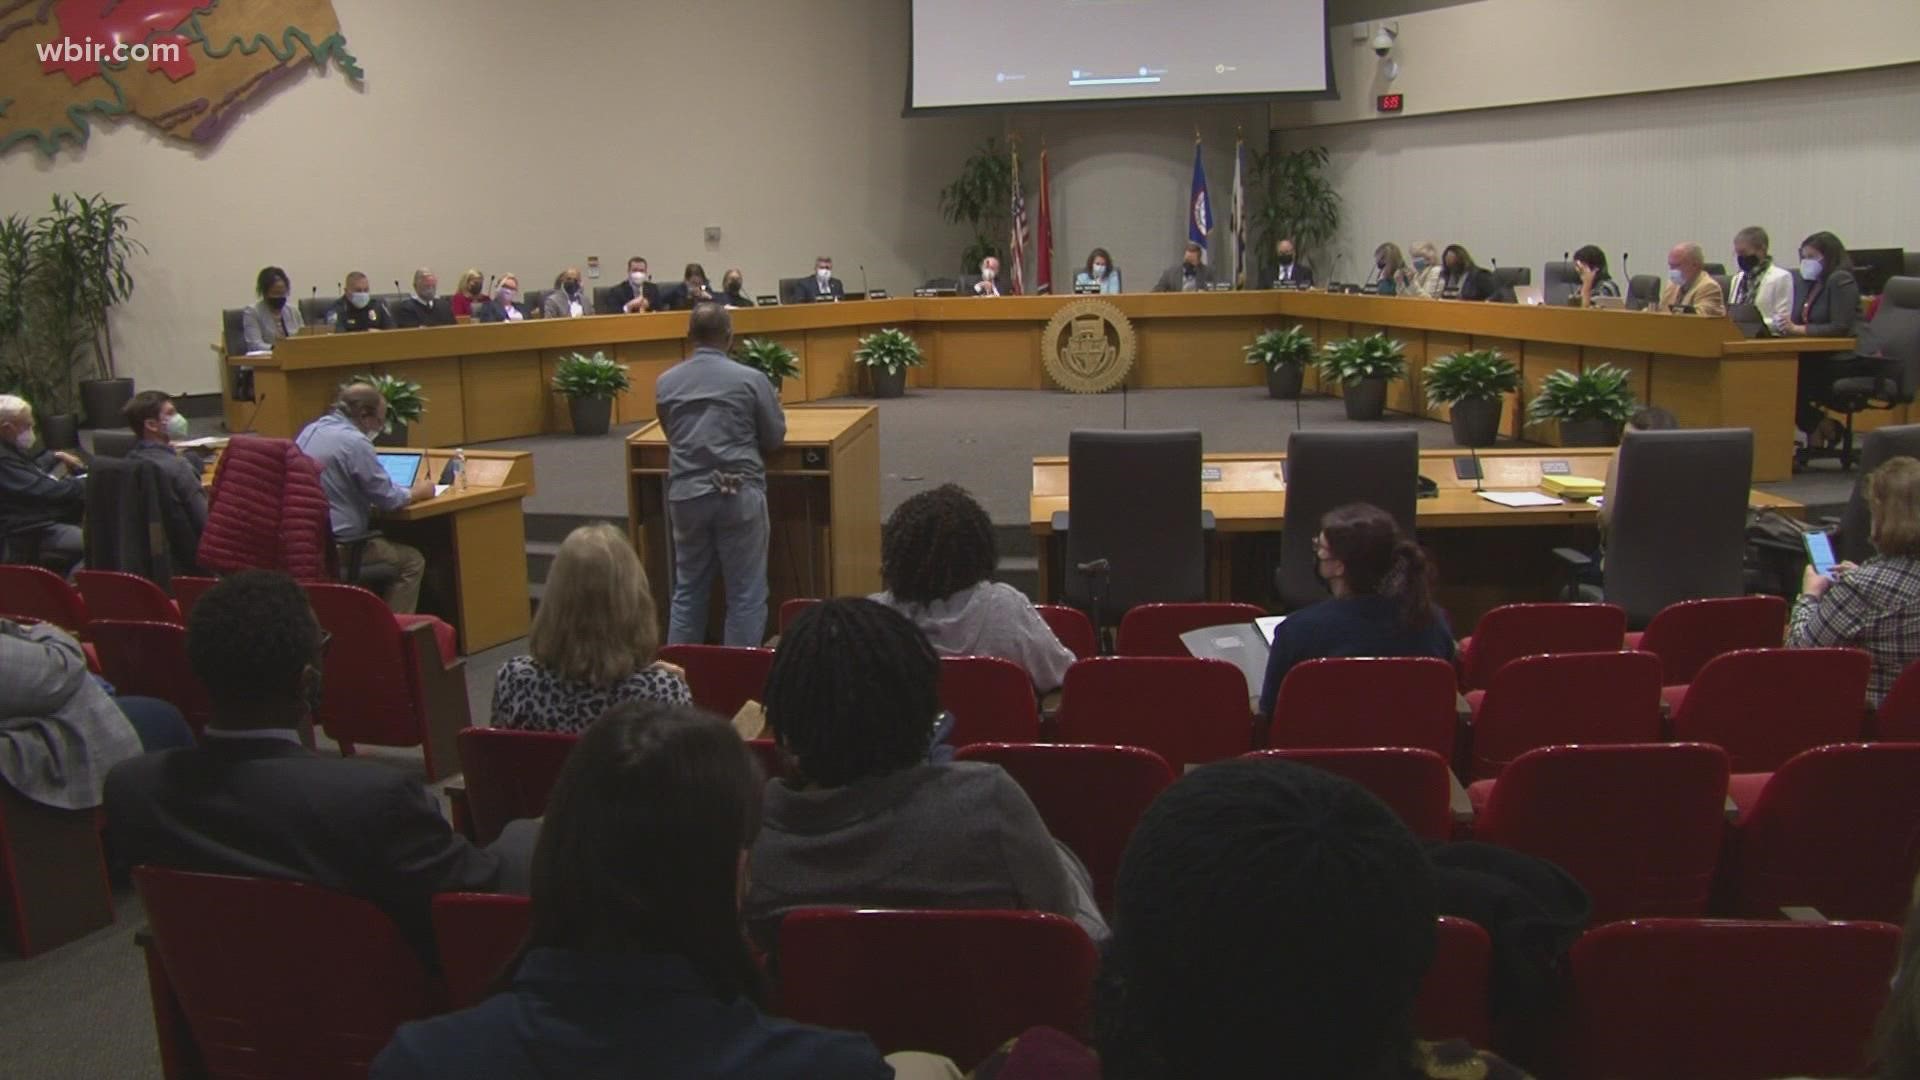 The city council voted to give police officers more overtime pay, after a controversial arrest of an activist and the death of a man in police custody.